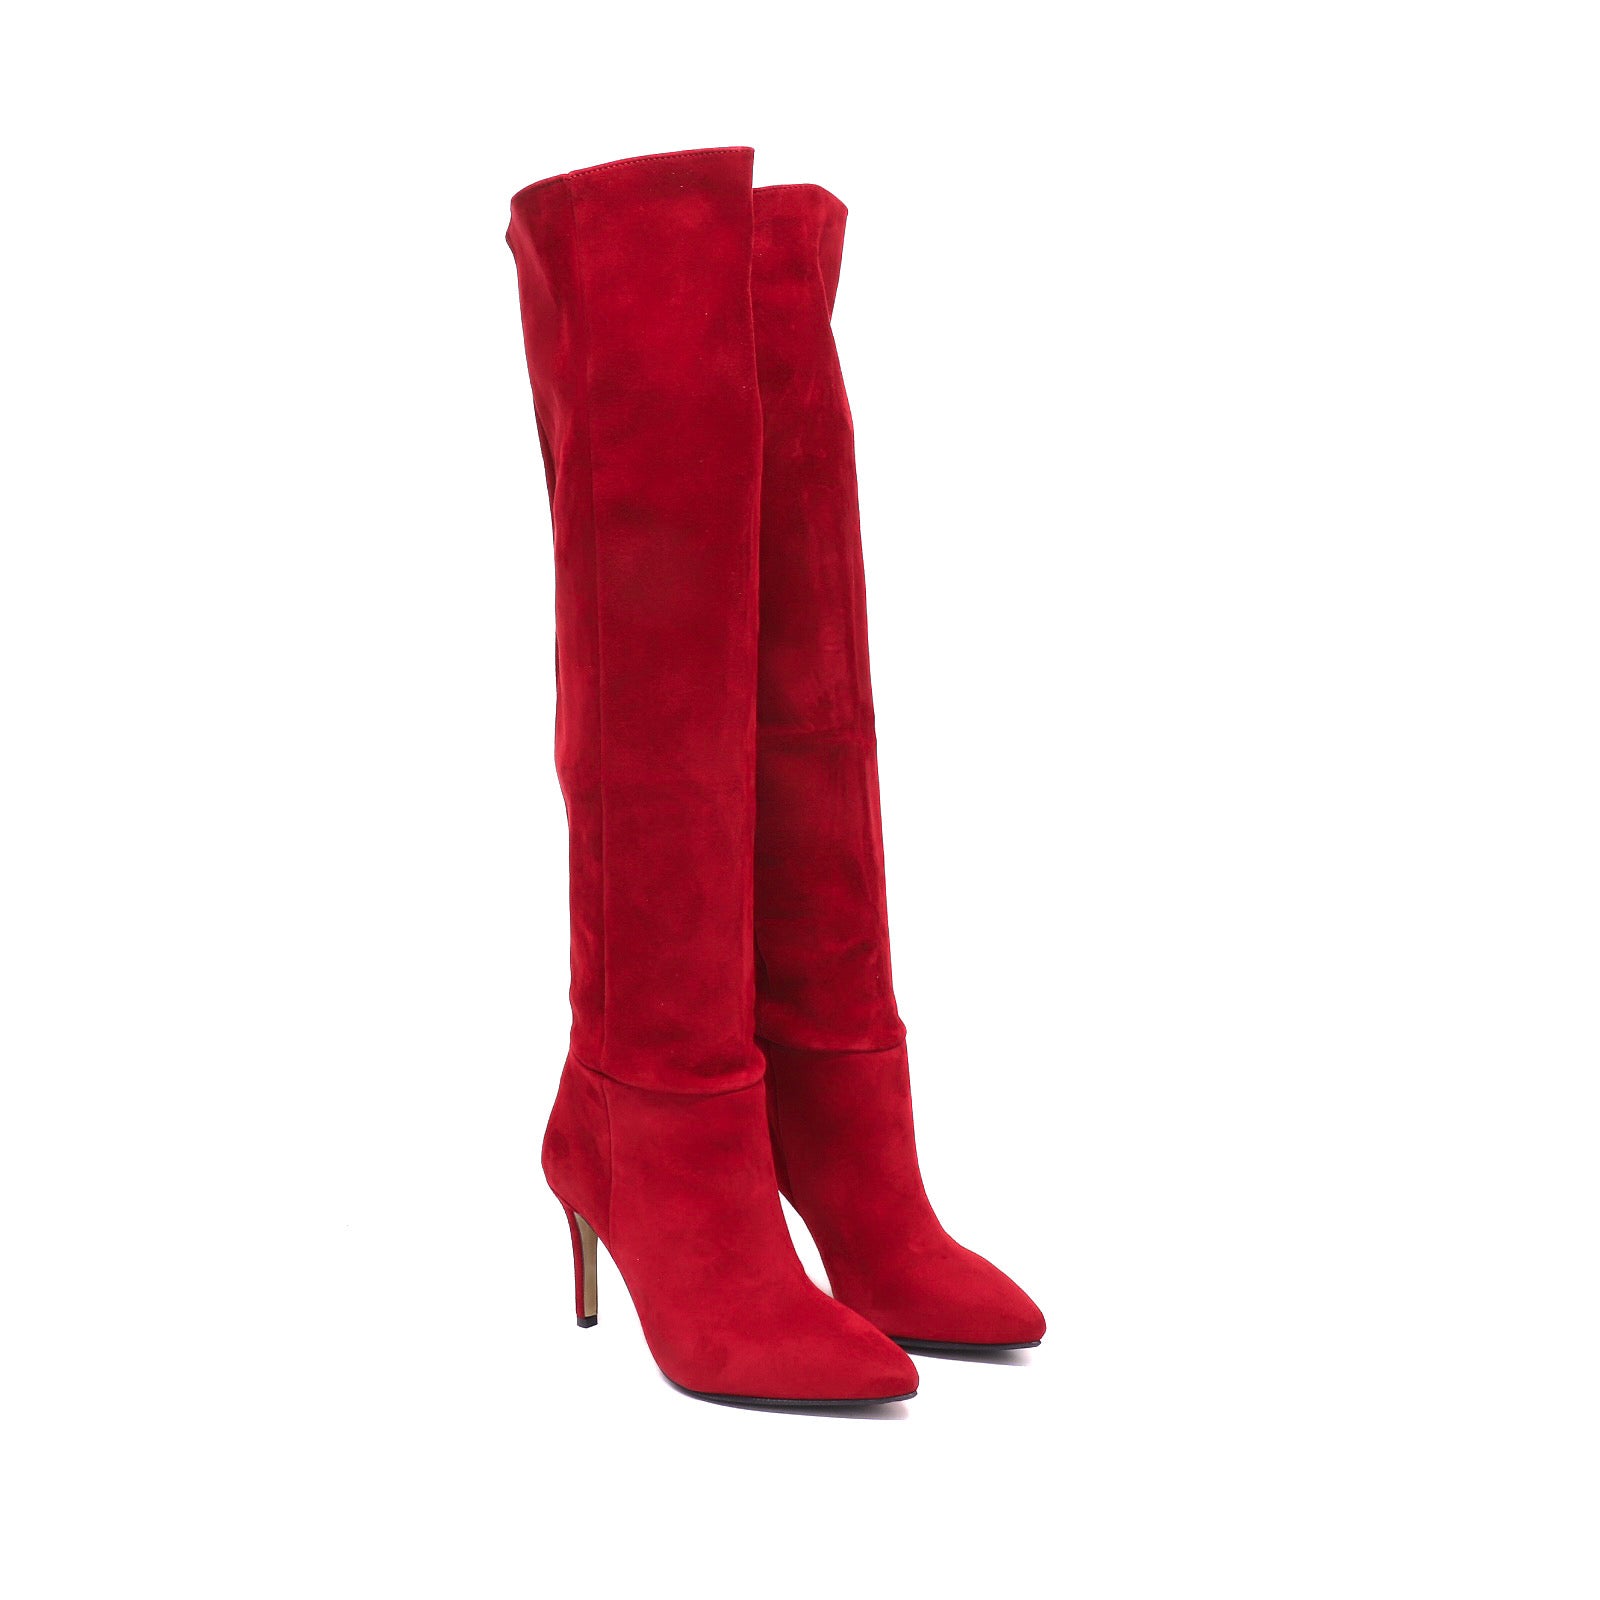 The Arianna Red Boot